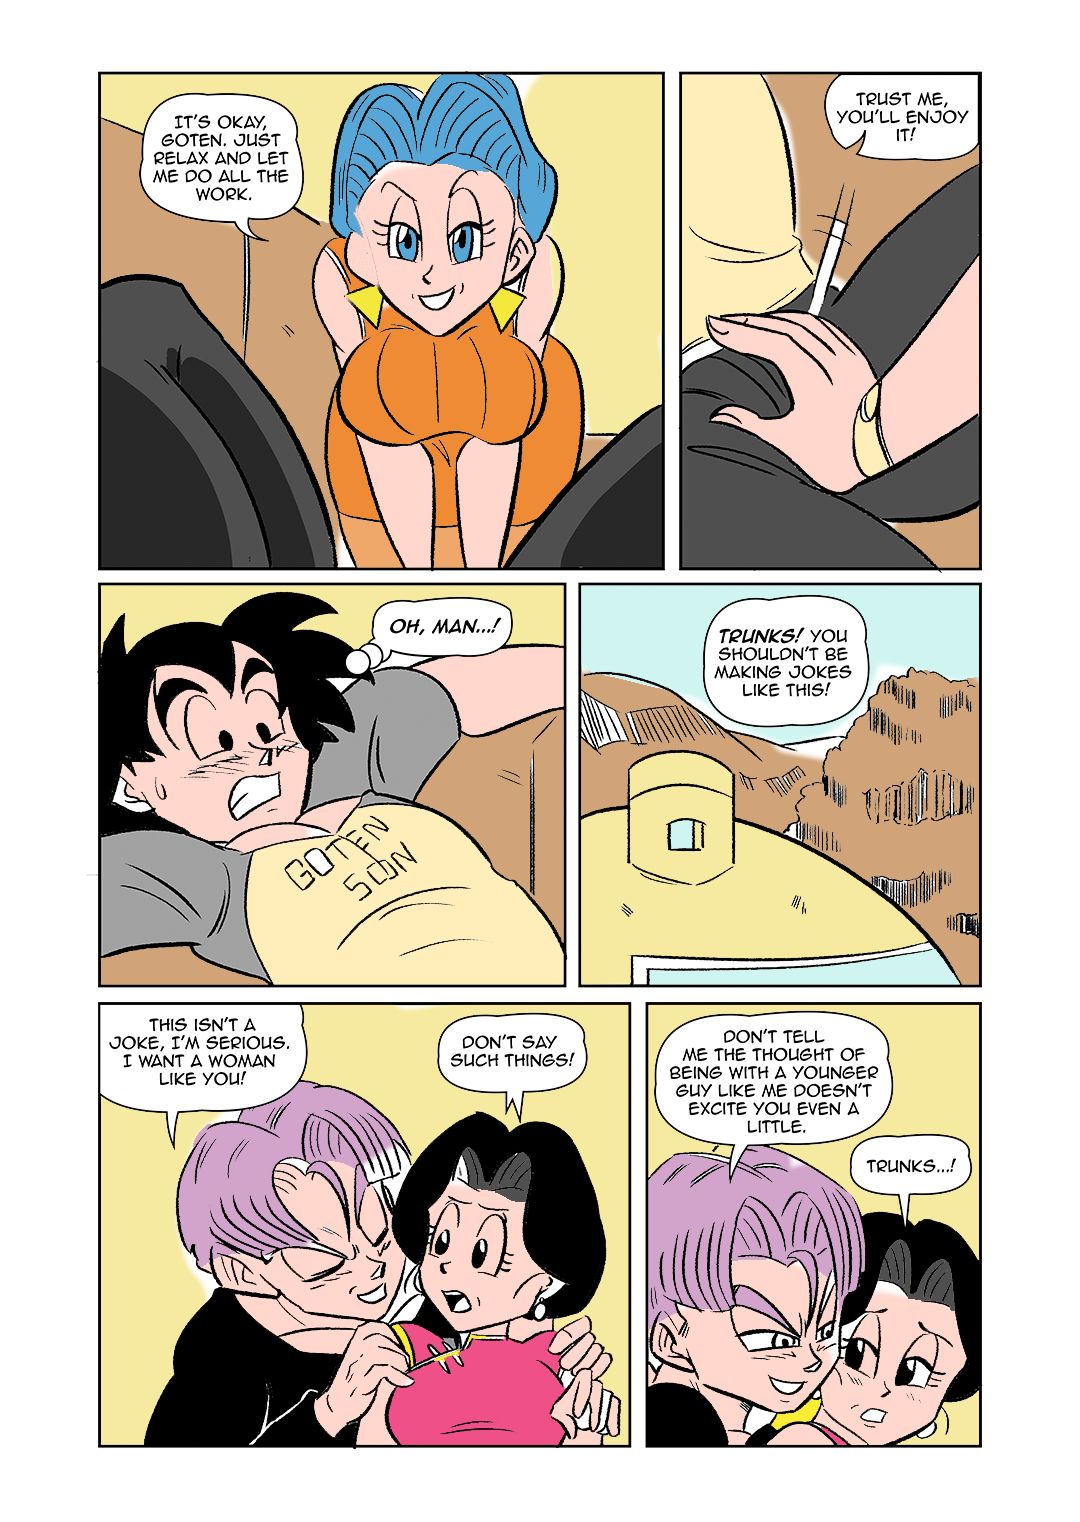 The Switch Up (Dragon Ball Z) by Funsexydb page 9